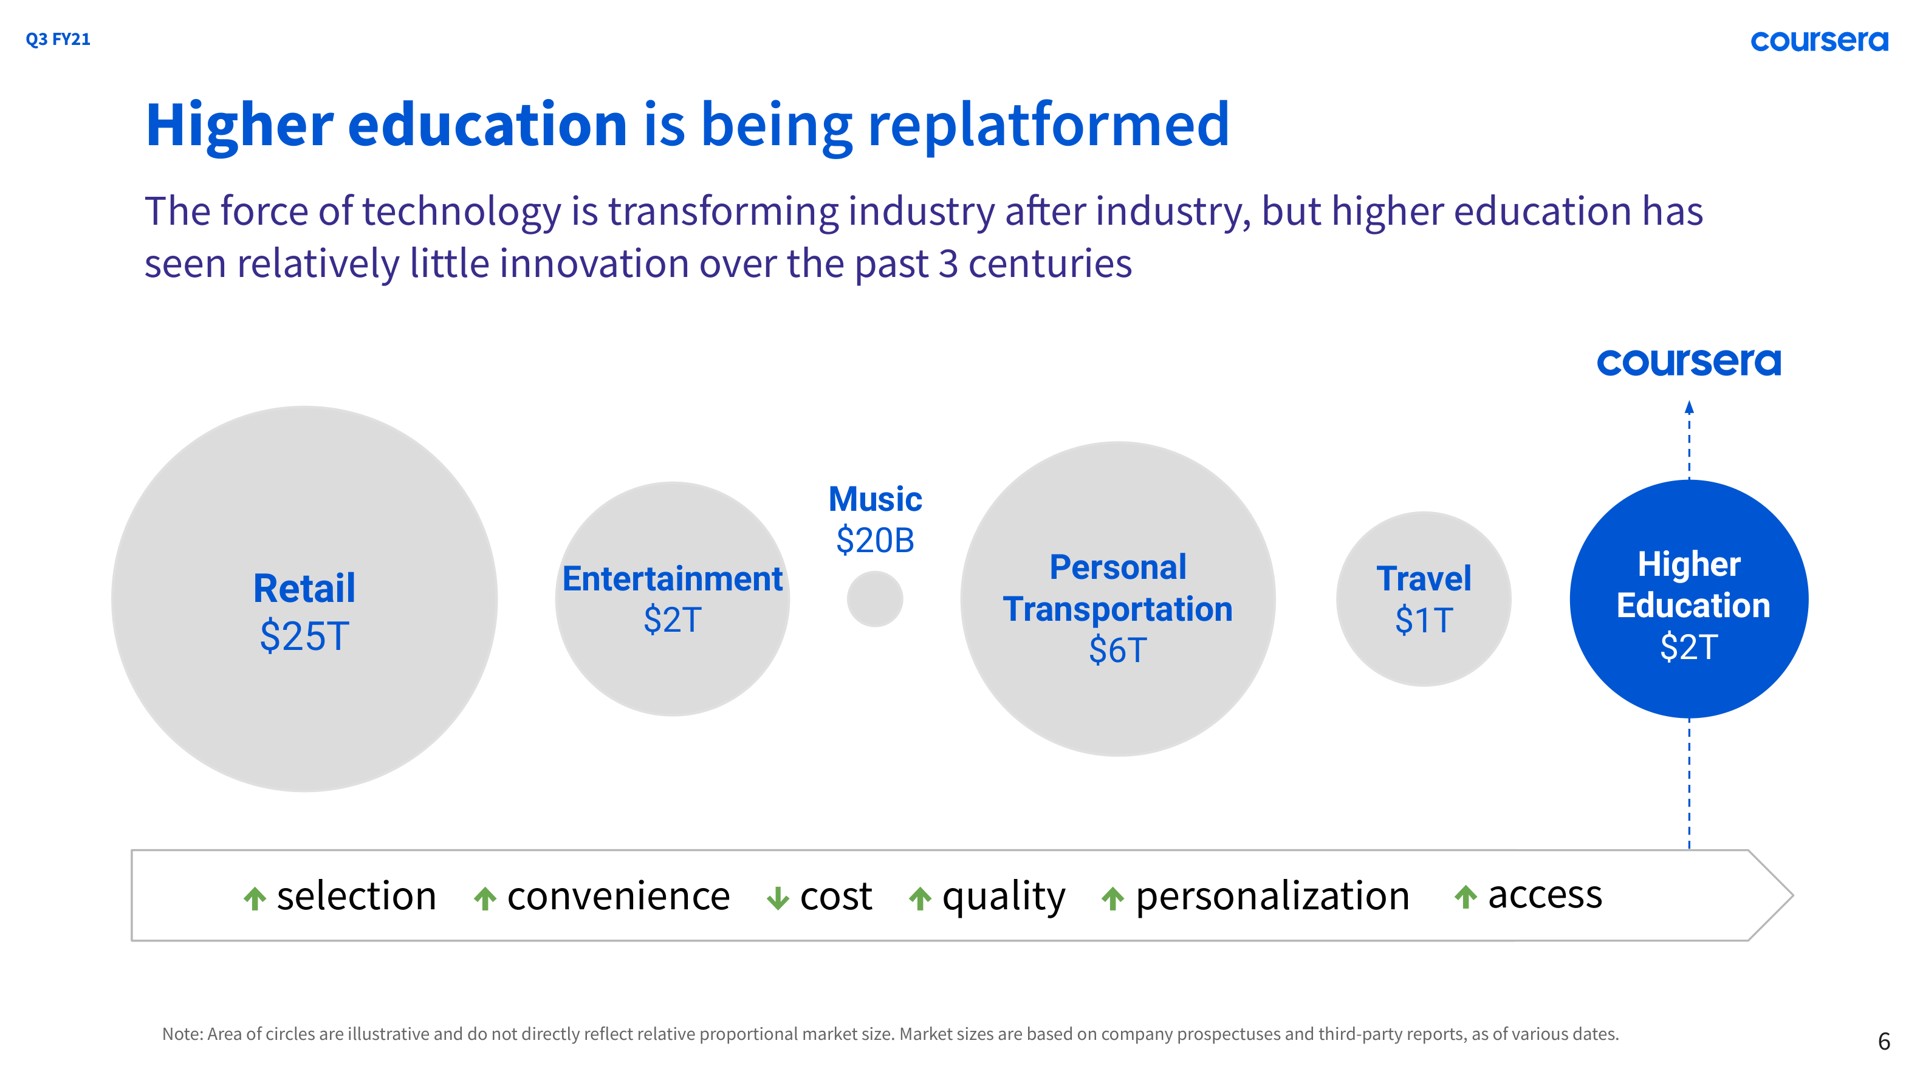 higher education is being retail ill entertainment personal eer travel | Coursera